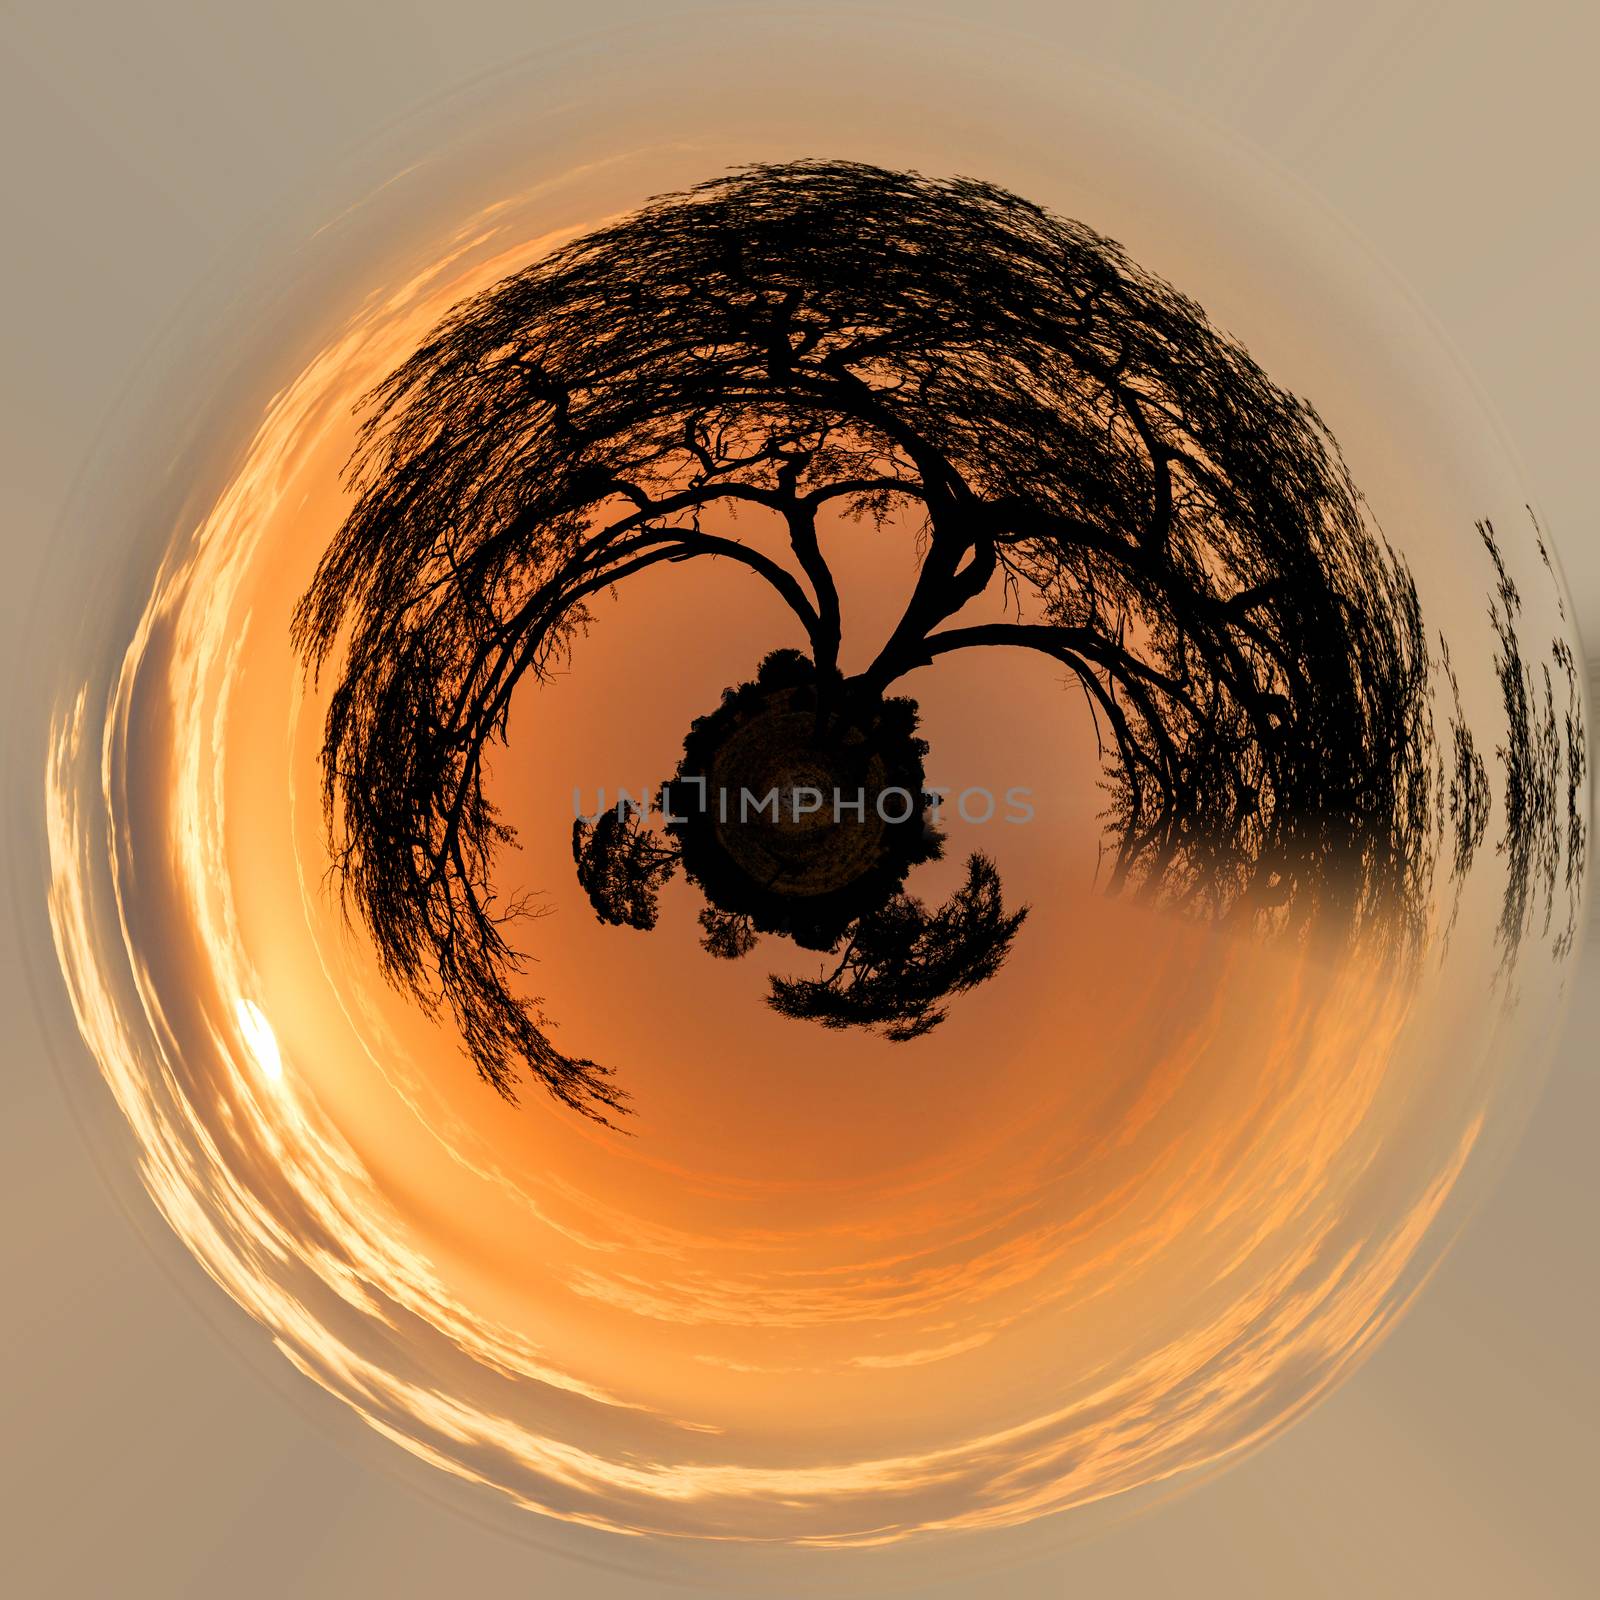 Beautiful Little planet. African sunset with tree in front, Hwange national park, Matabeleland, North Zimbabwe. Ecology concept. Save world nature project.